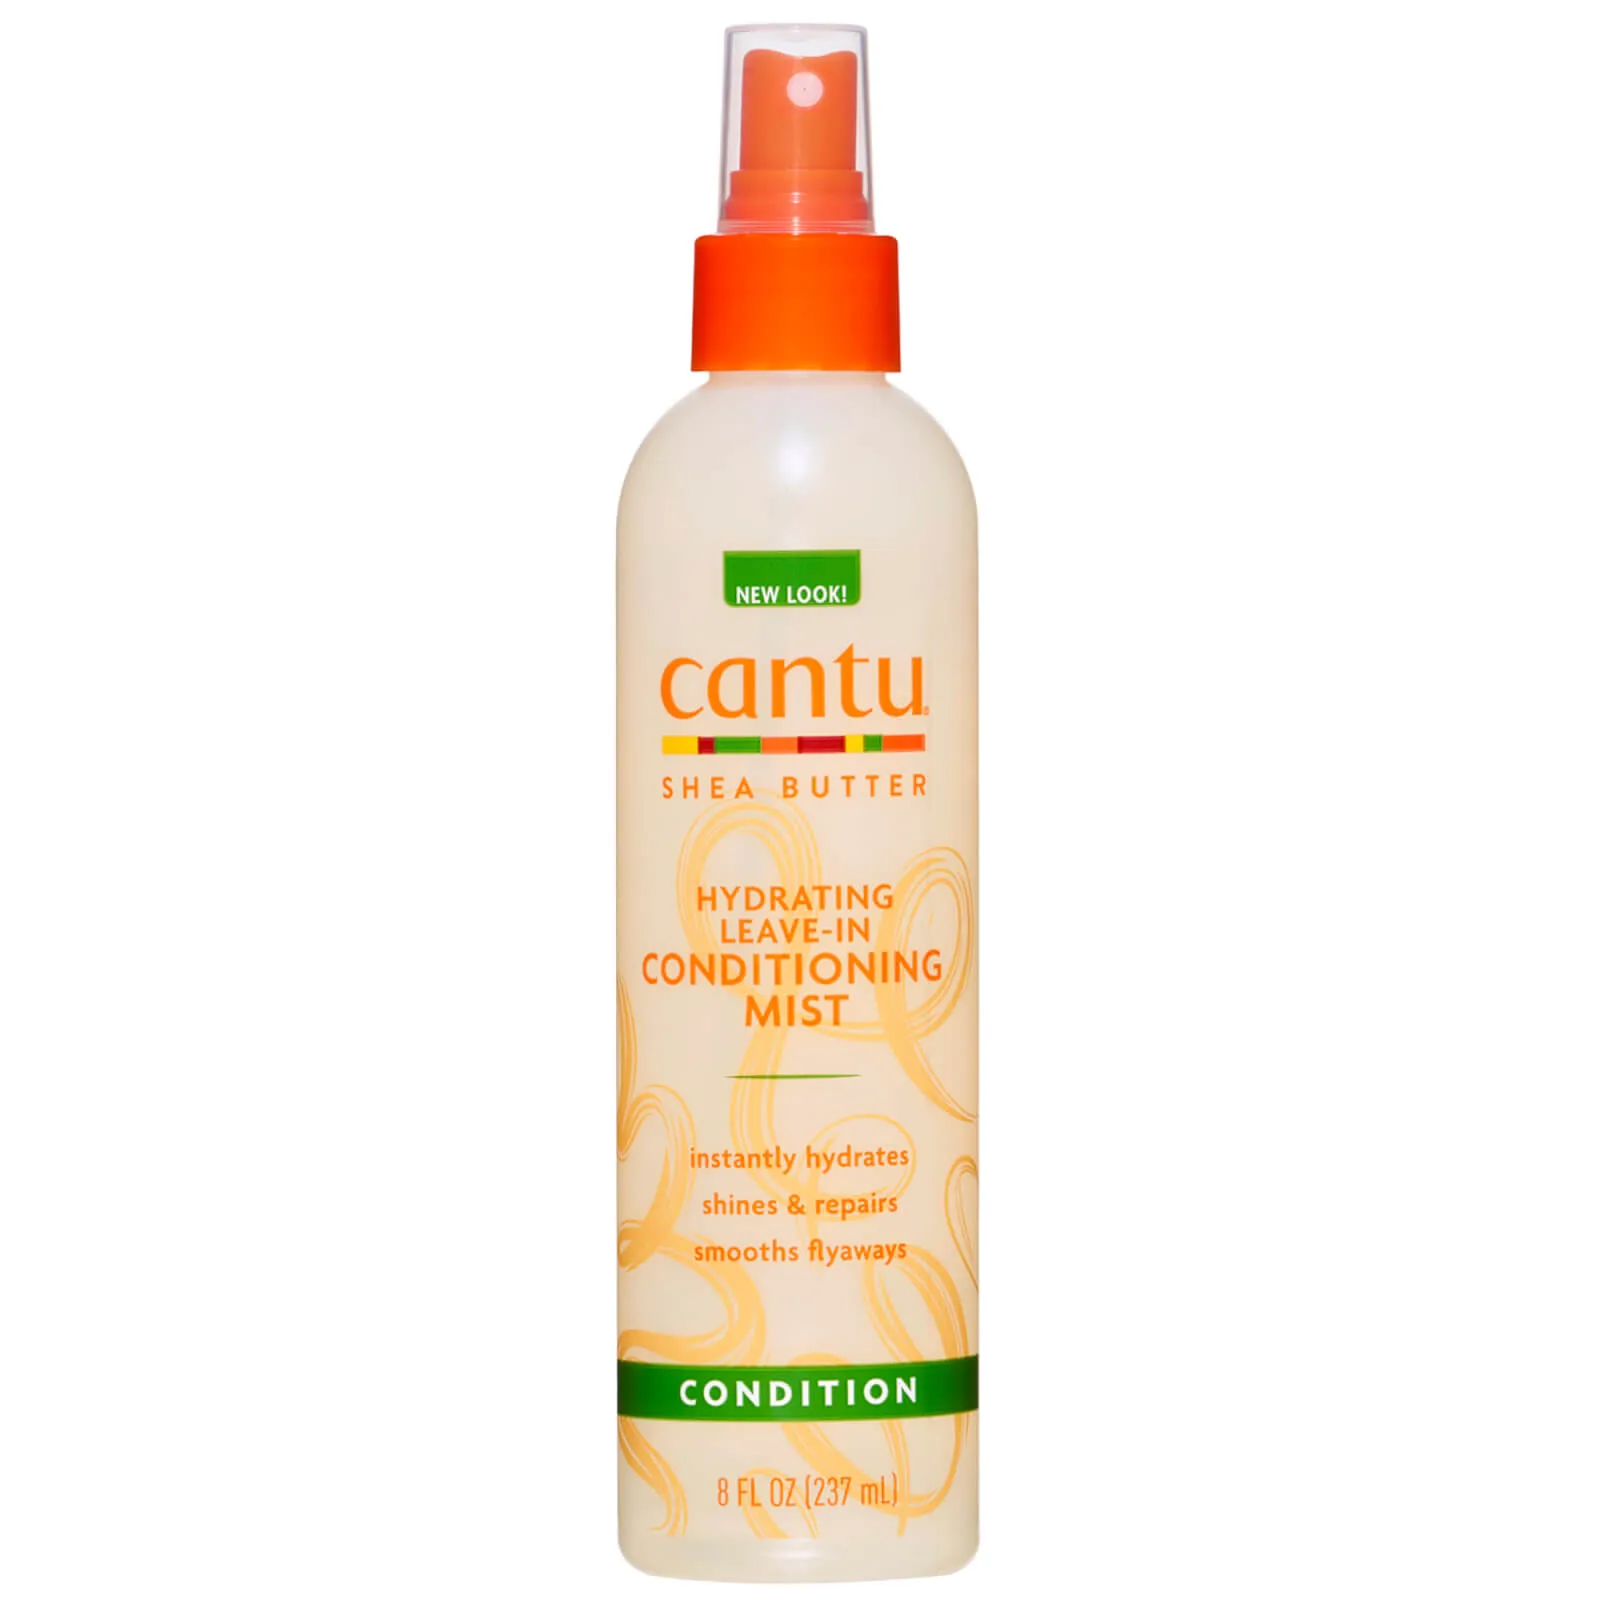  Shea Butter Hydrating Leave-In Conditioning Mist 237ml